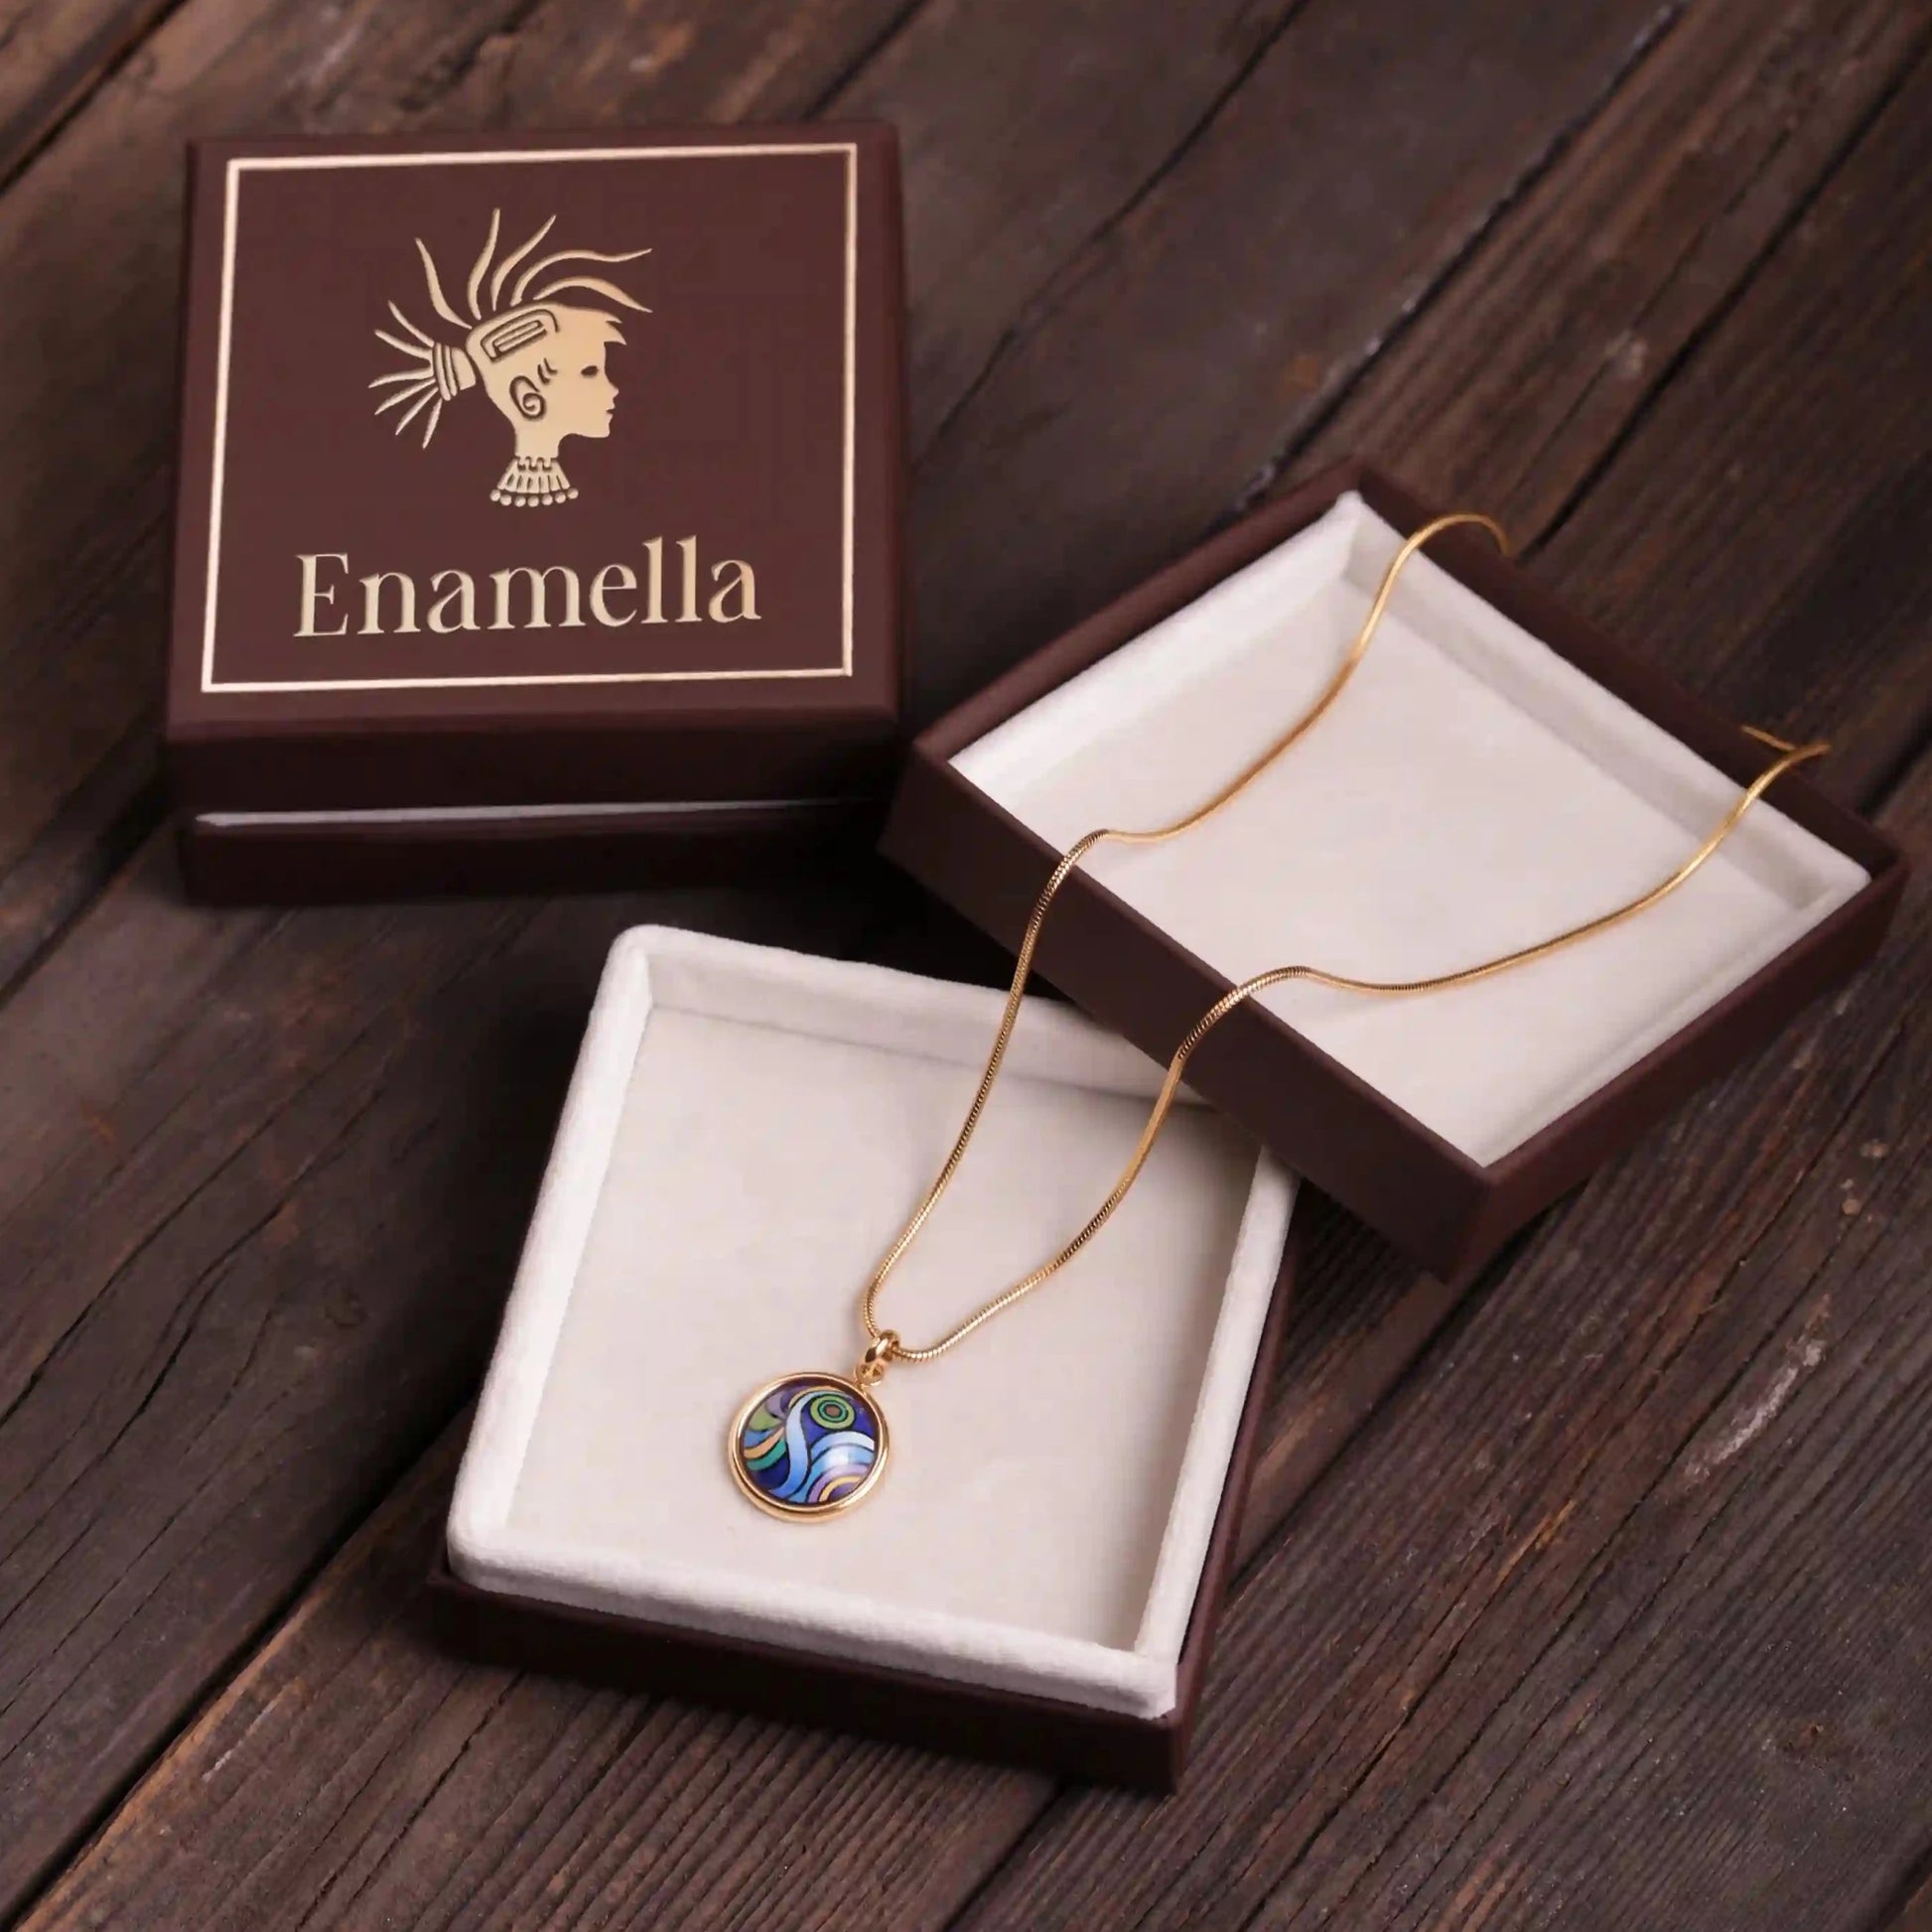 Yellow gold round necklace with the painting of Van Gogh's "Starry Night". The necklace is placed inside a box